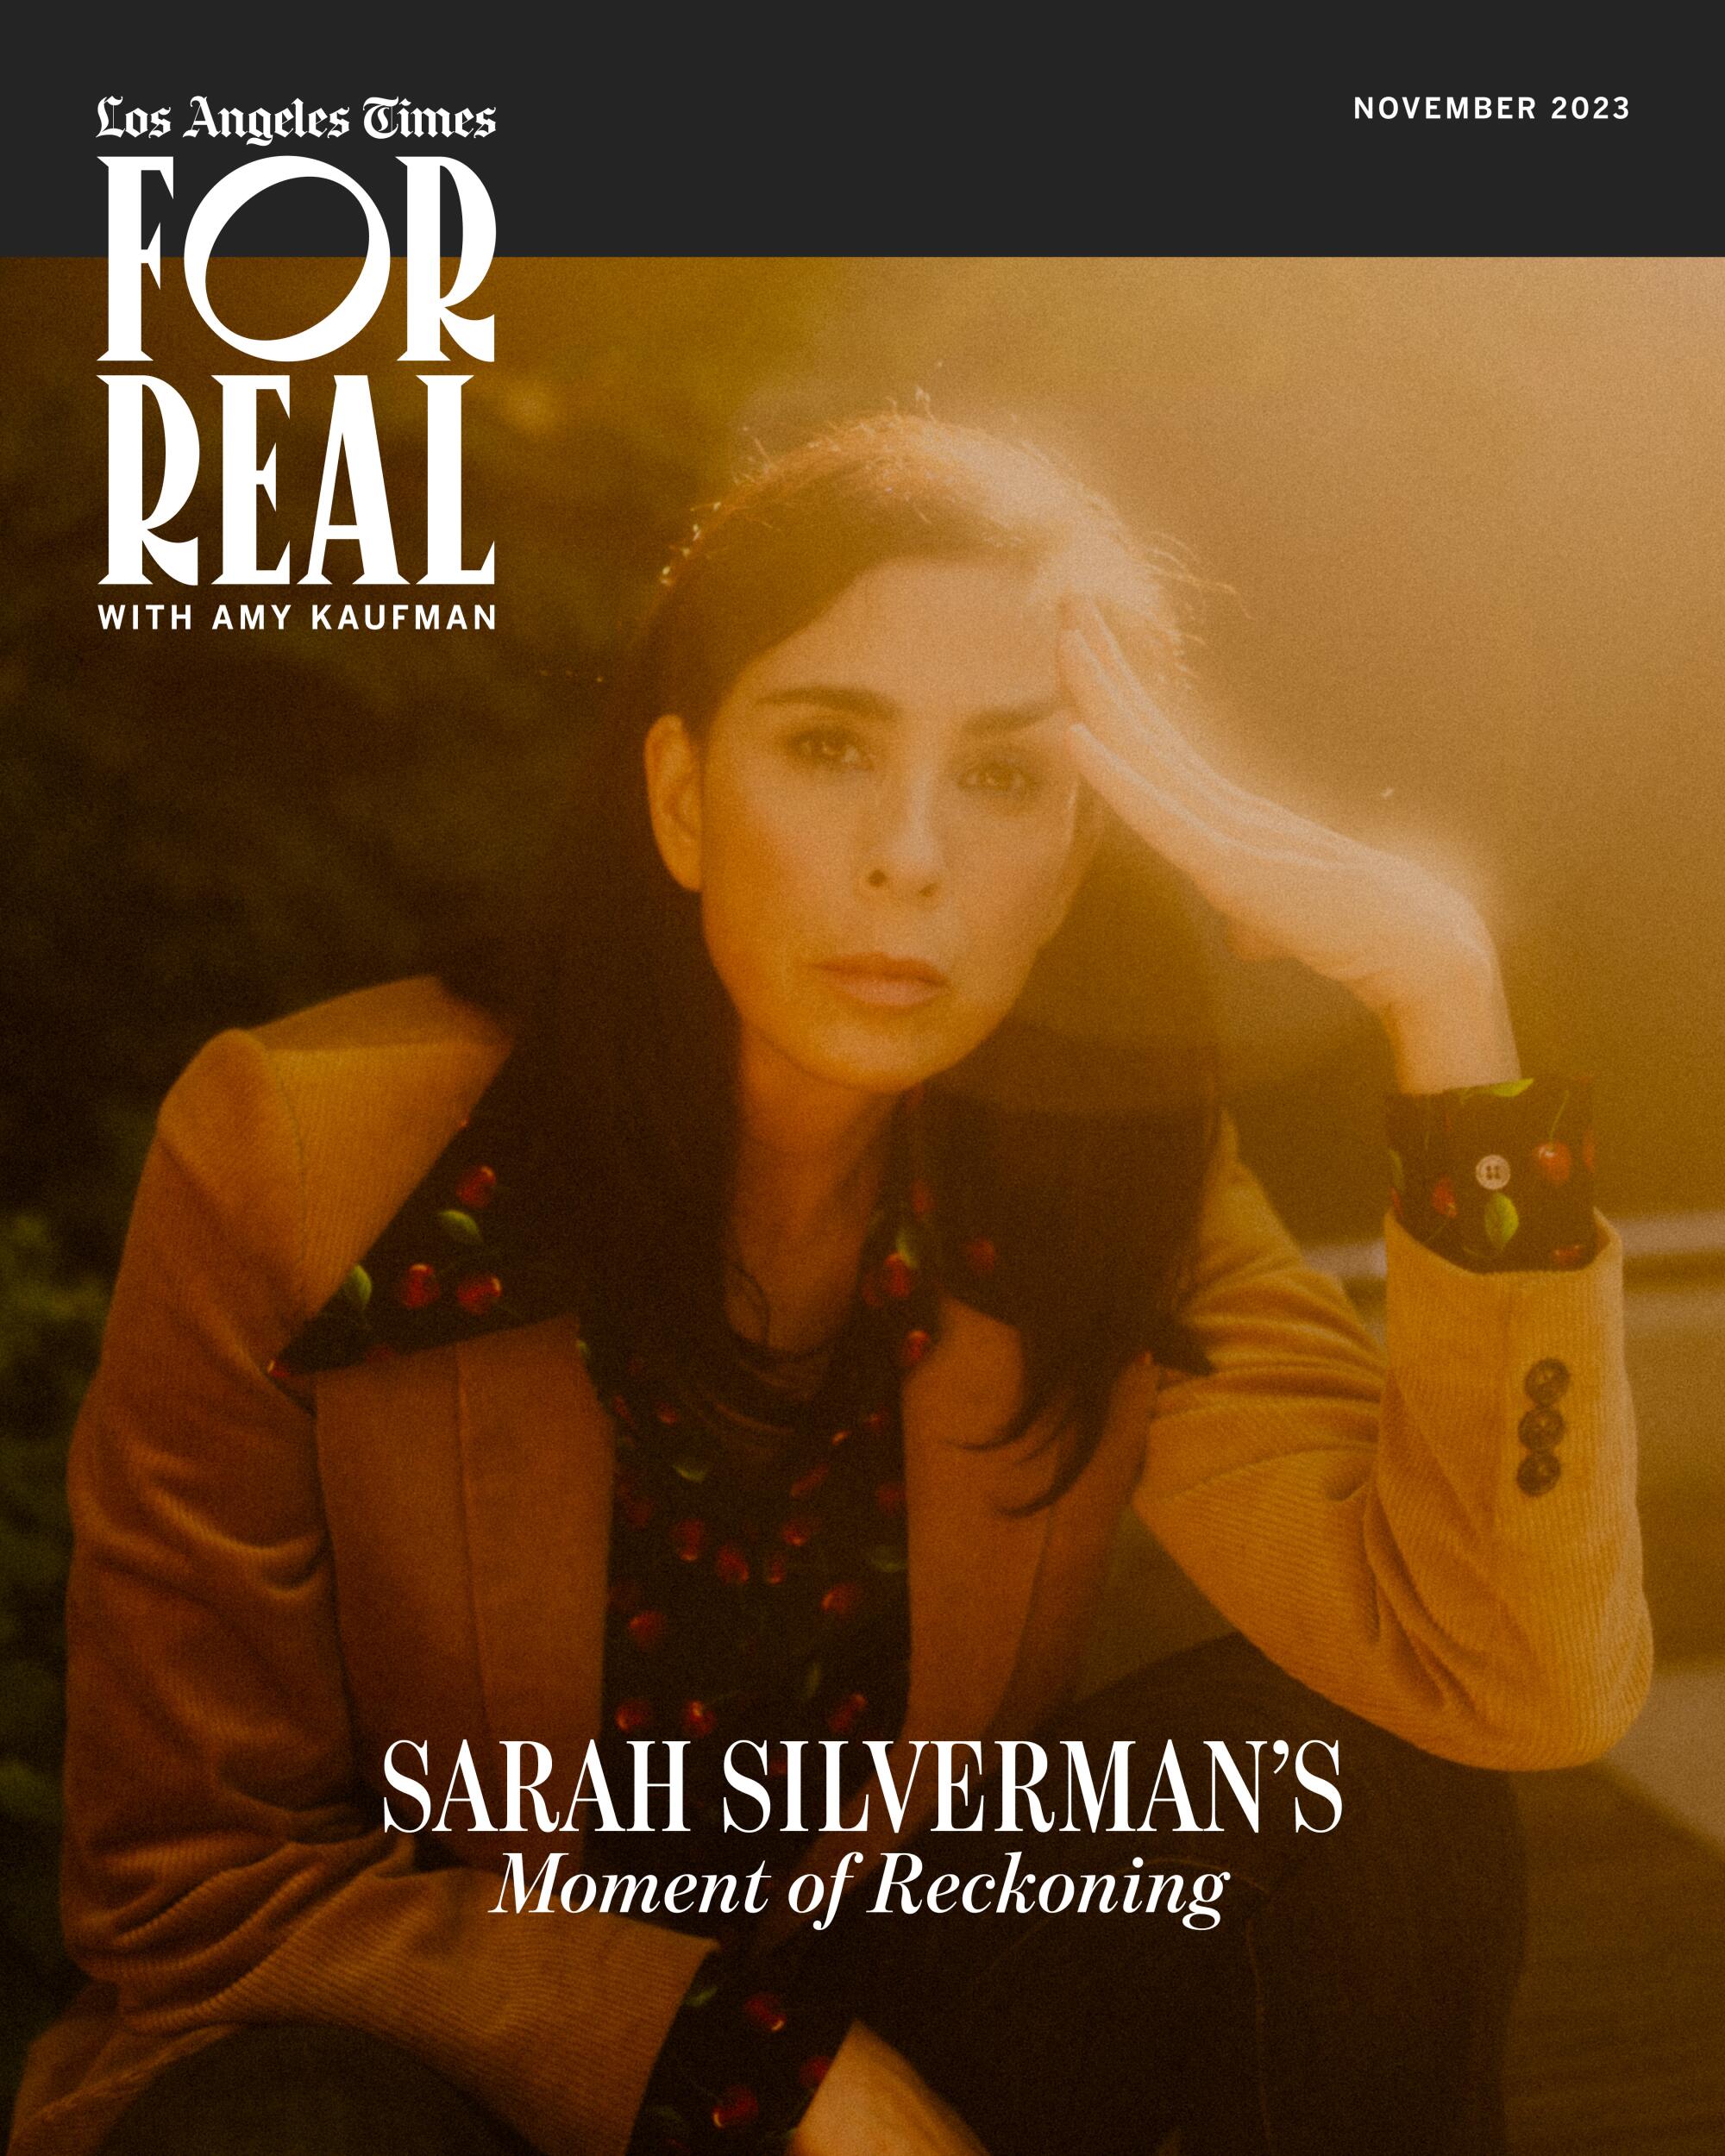 For Real with Amy Kaufman's Sarah Silverman digital cover